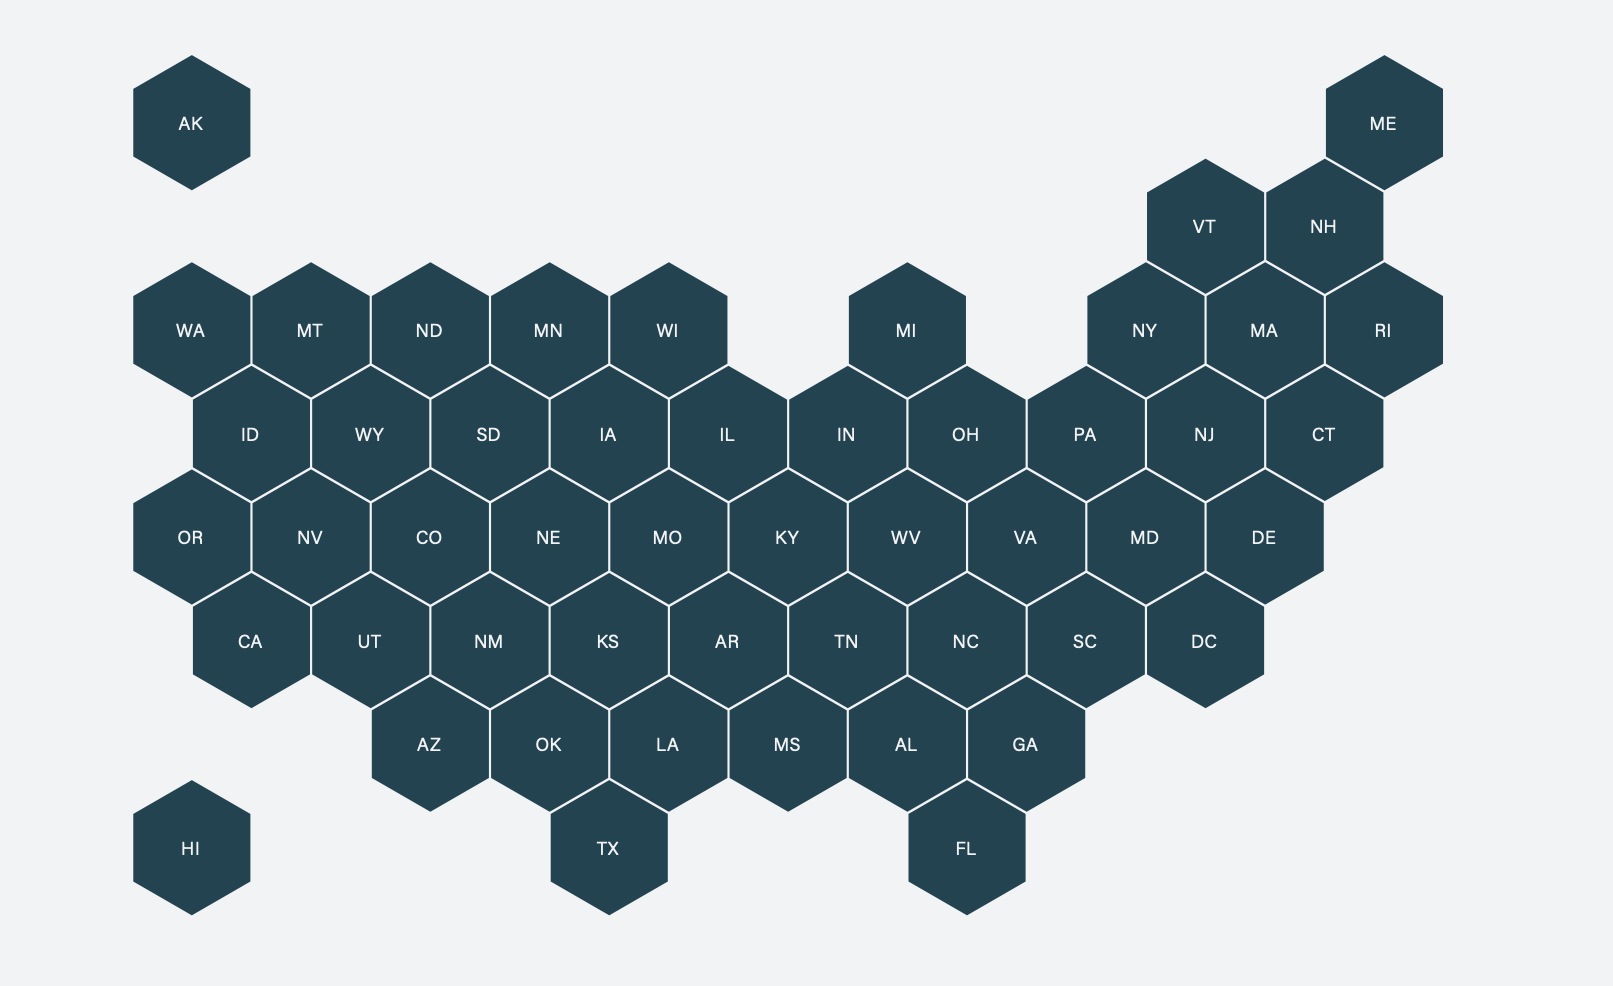 honeycomb map of the United States of America